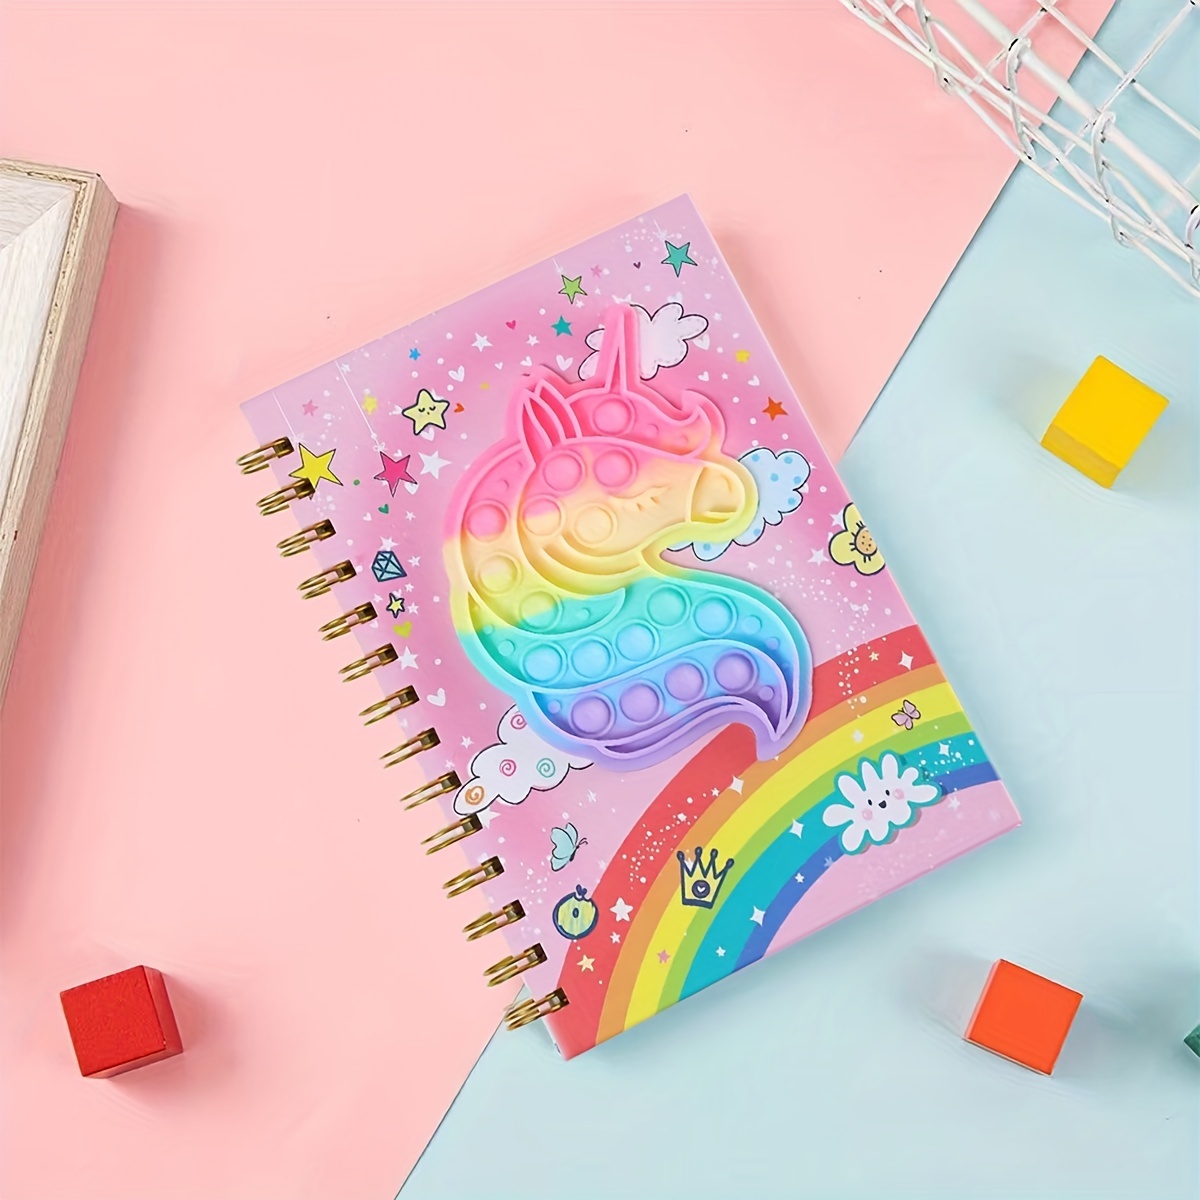 Sketchbook: Cute Whale Unicorn Themed Journal - Blank Doodling Sketchbook  For Girls - Daily Sketching, Drawing, Coloring, and Writing Notebook